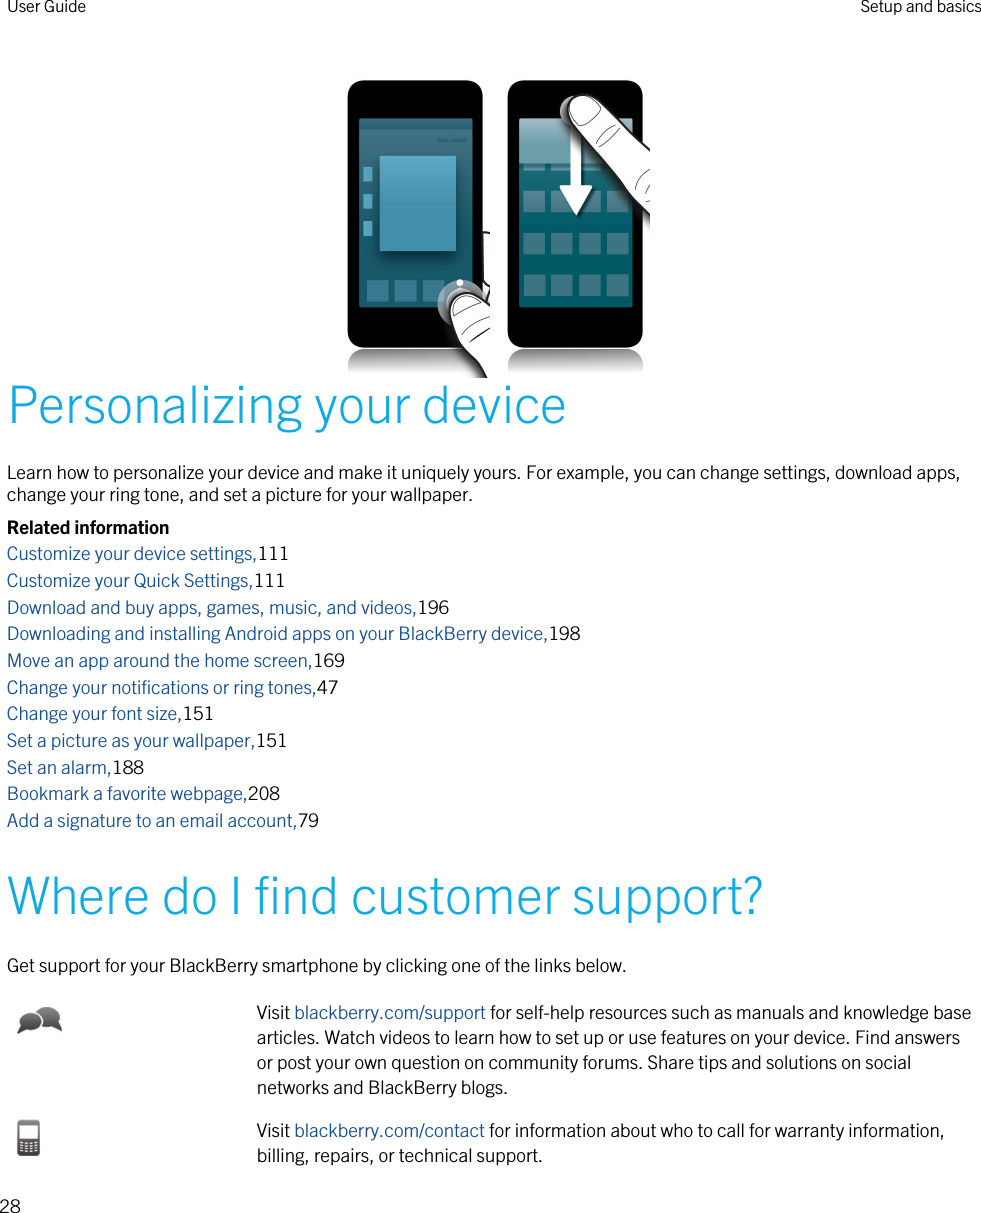 Personalizing your deviceLearn how to personalize your device and make it uniquely yours. For example, you can change settings, download apps, change your ring tone, and set a picture for your wallpaper.Related informationCustomize your device settings,111Customize your Quick Settings,111Download and buy apps, games, music, and videos,196Downloading and installing Android apps on your BlackBerry device,198Move an app around the home screen,169Change your notifications or ring tones,47Change your font size,151Set a picture as your wallpaper,151Set an alarm,188Bookmark a favorite webpage,208Add a signature to an email account,79Where do I find customer support?Get support for your BlackBerry smartphone by clicking one of the links below.Visit blackberry.com/support for self-help resources such as manuals and knowledge base articles. Watch videos to learn how to set up or use features on your device. Find answers or post your own question on community forums. Share tips and solutions on social networks and BlackBerry blogs.Visit blackberry.com/contact for information about who to call for warranty information, billing, repairs, or technical support.User Guide Setup and basics28